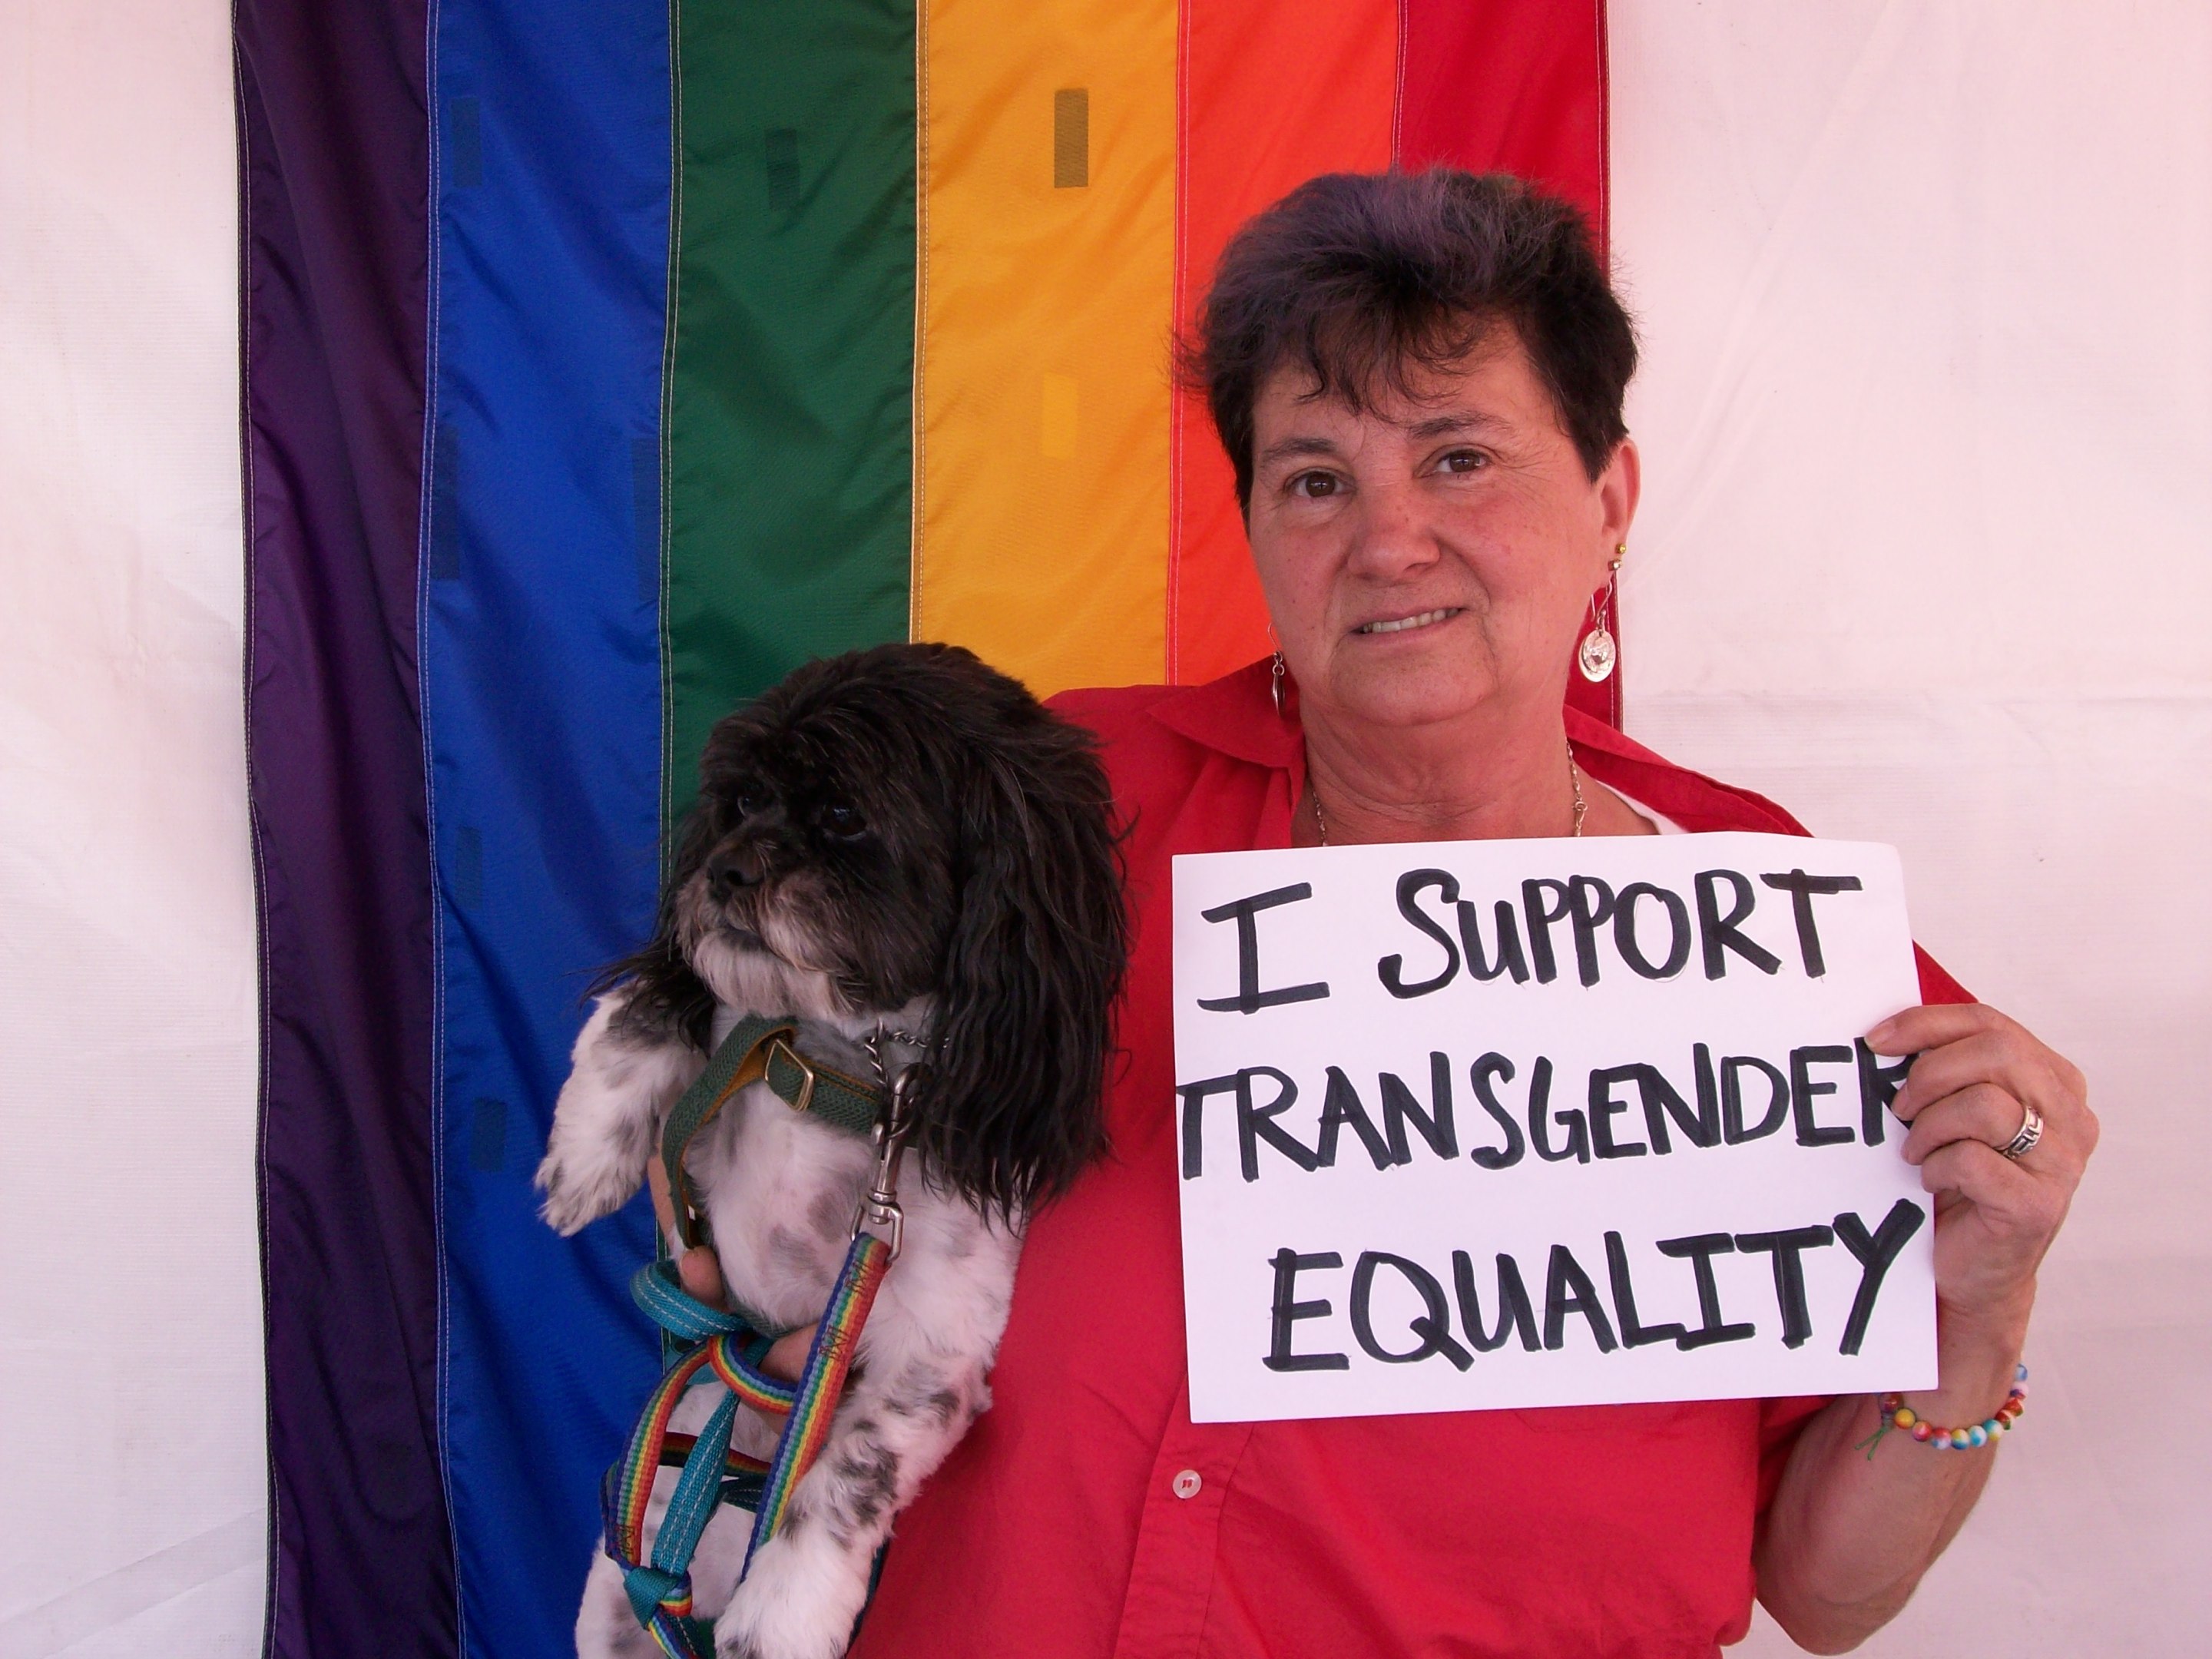 Individual holding dog poses in front of rainbow banner with sign reading "I Support Transgender Equality."